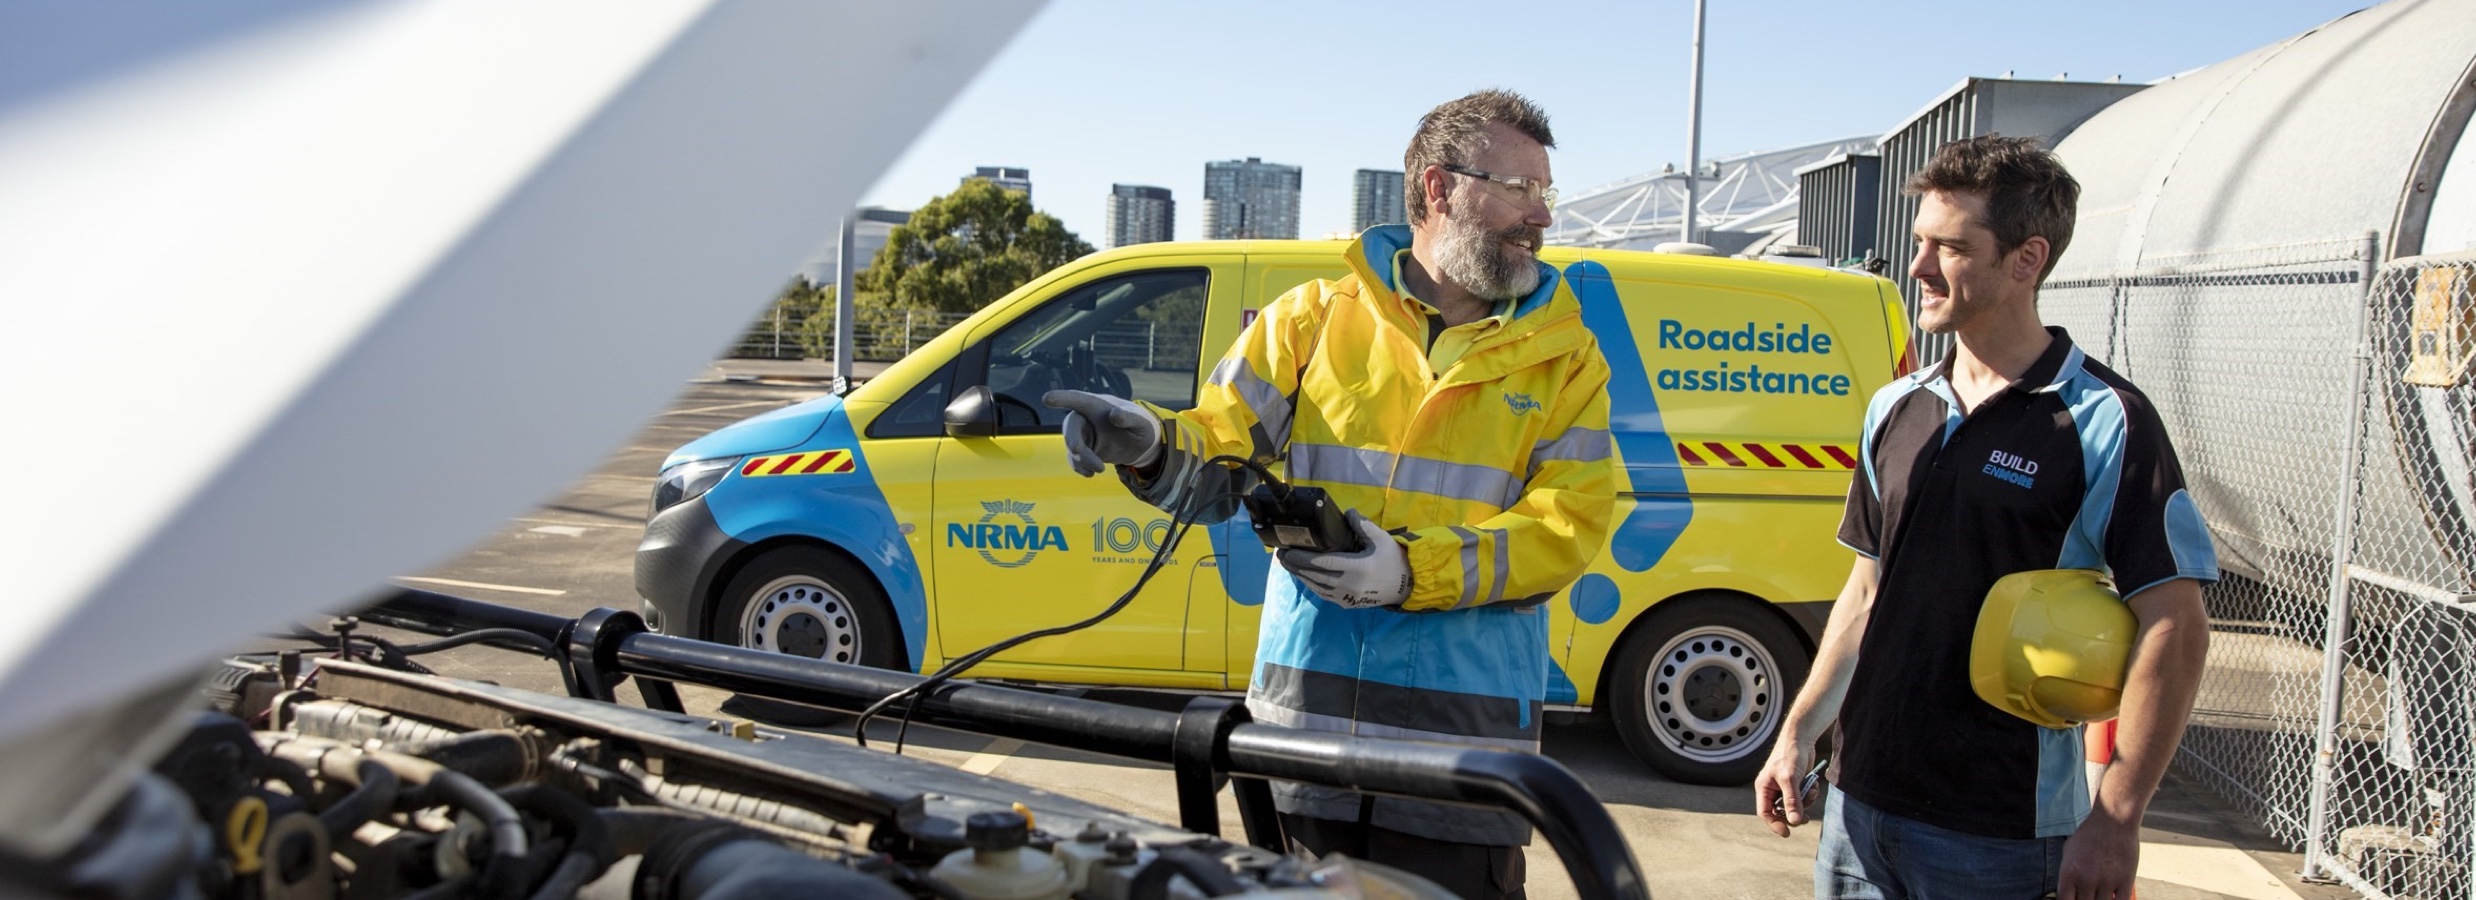 NRMA roadside assistance helping a business owner